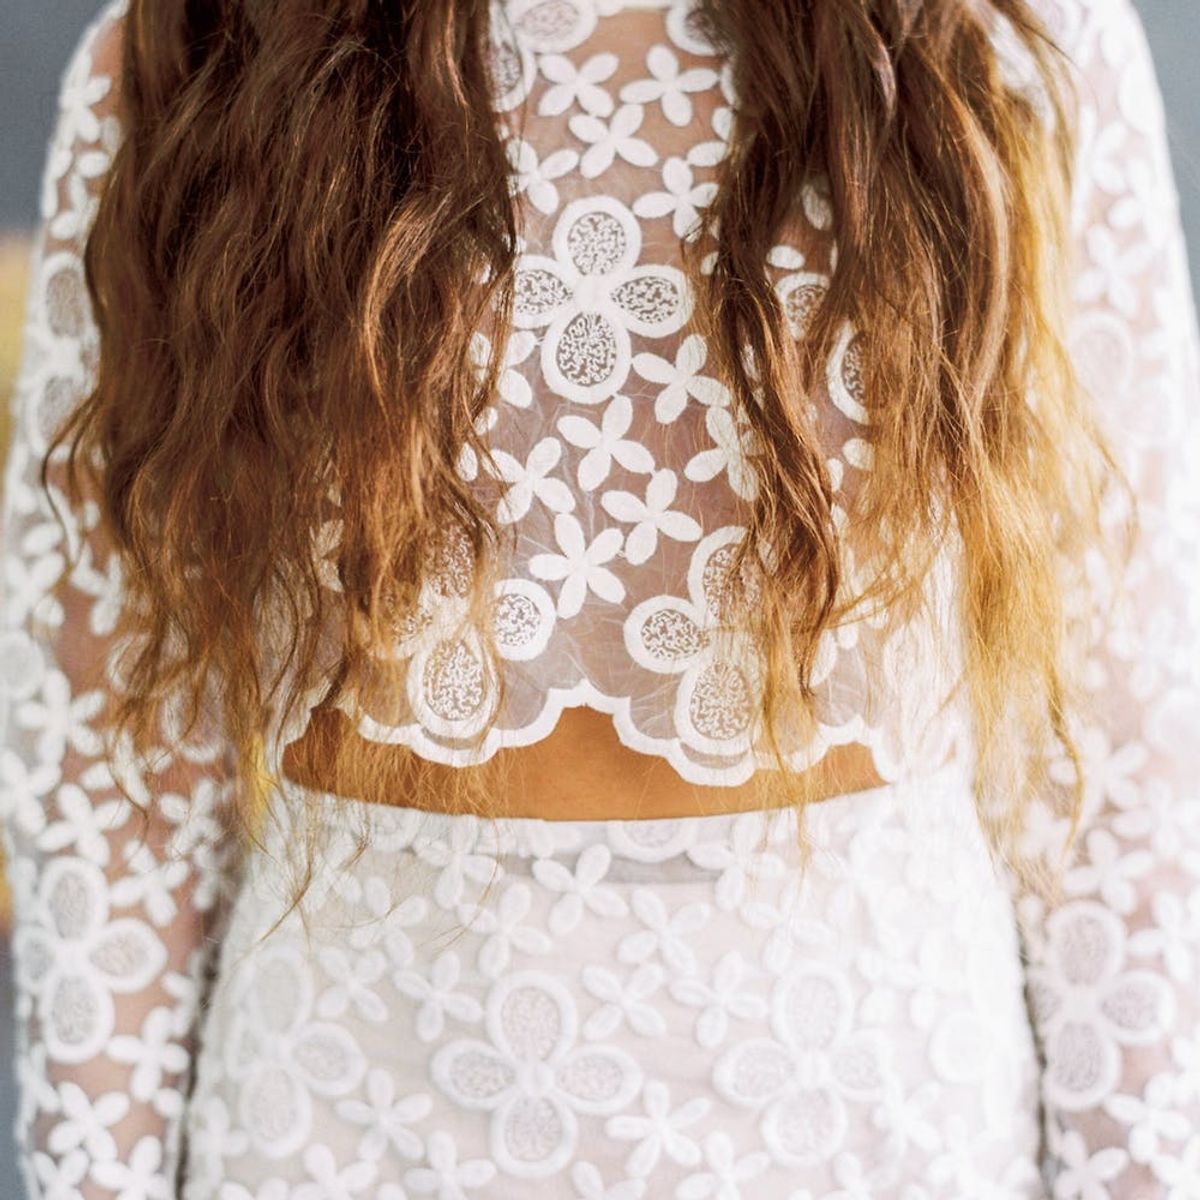 Get an Elevated Bohemian Wedding Look With Tips from LOHO Bride’s Christy Baird